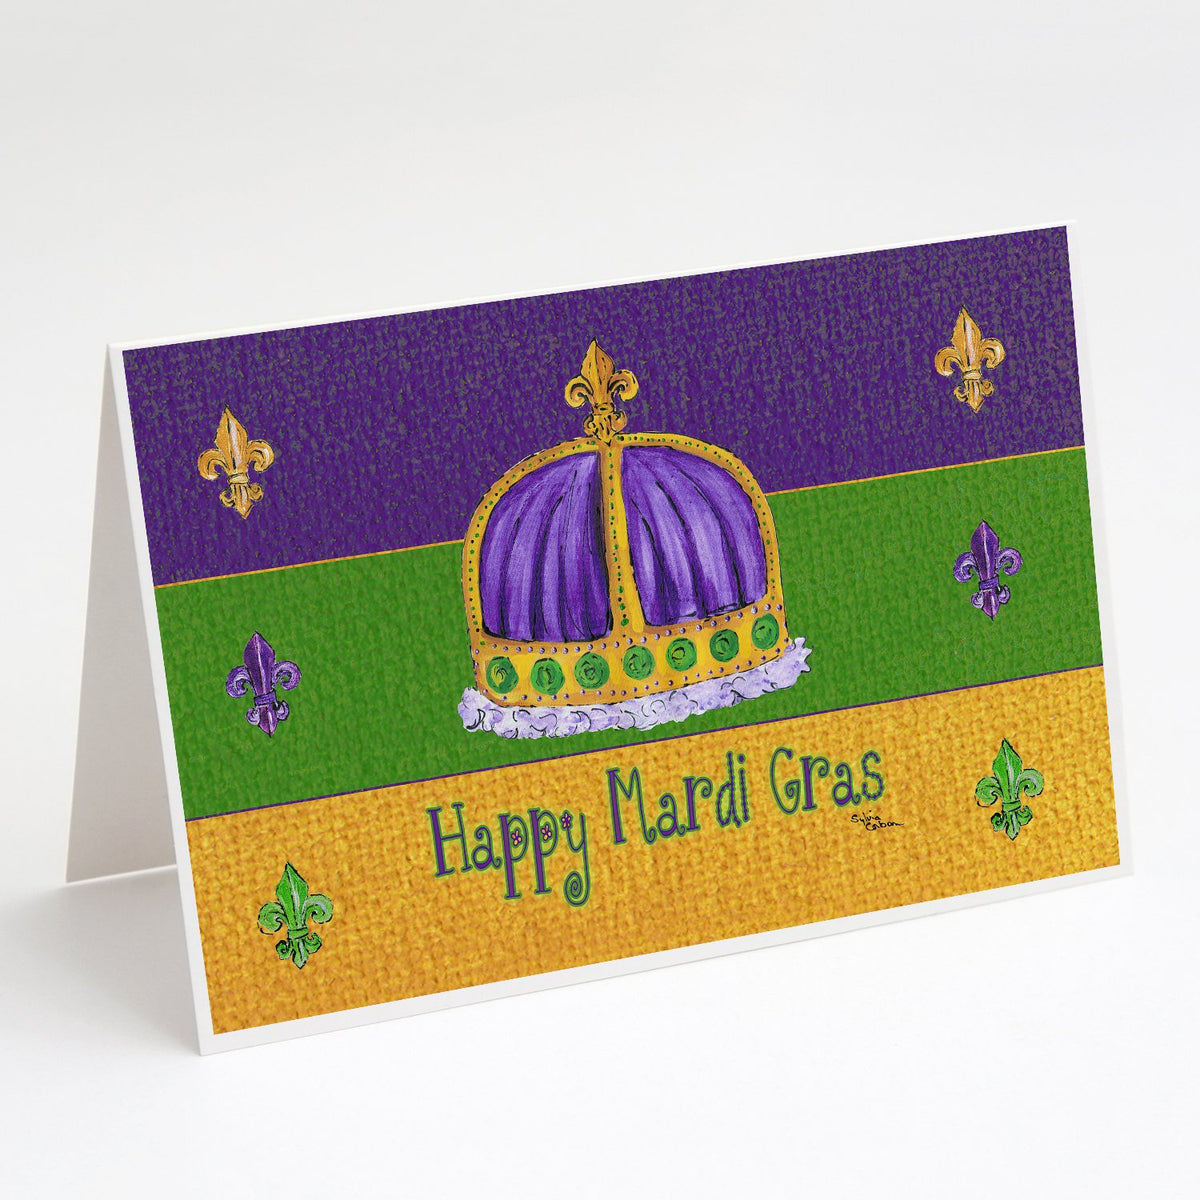 Buy this Happy Mardi Gras Crown Greeting Cards and Envelopes Pack of 8